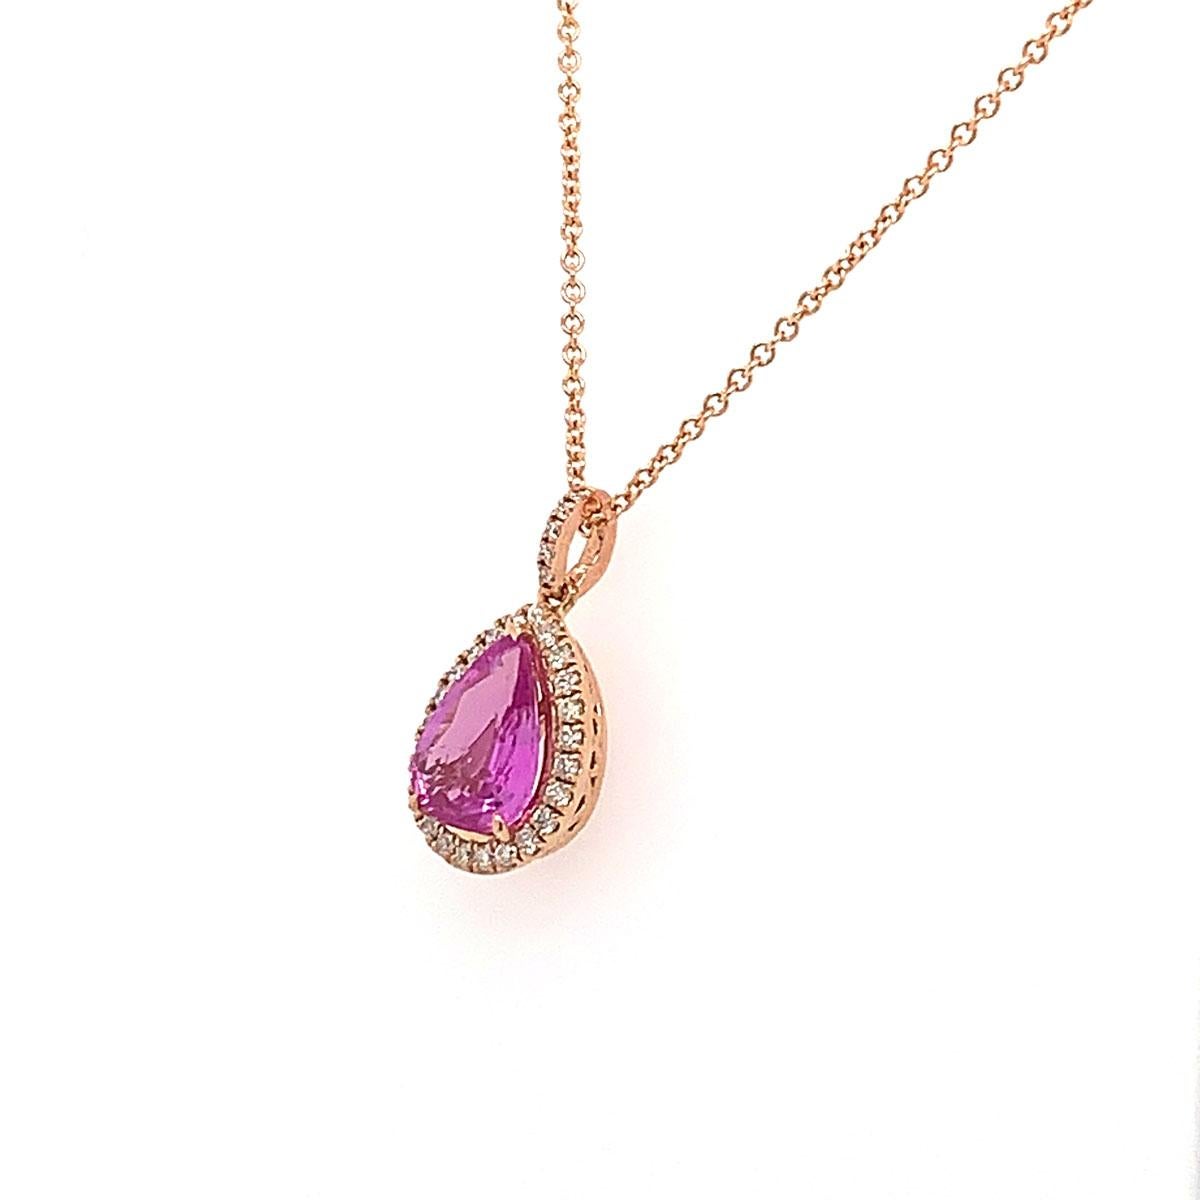 These extraordinary 14k Rose gold pendant feature preminum quality Pear Shape Pink Sapphire 2.06 carat framed in a halo of brilliant diamonds. This pendant is ideal for special occasions. Experience the Difference!

Product details: 

Center